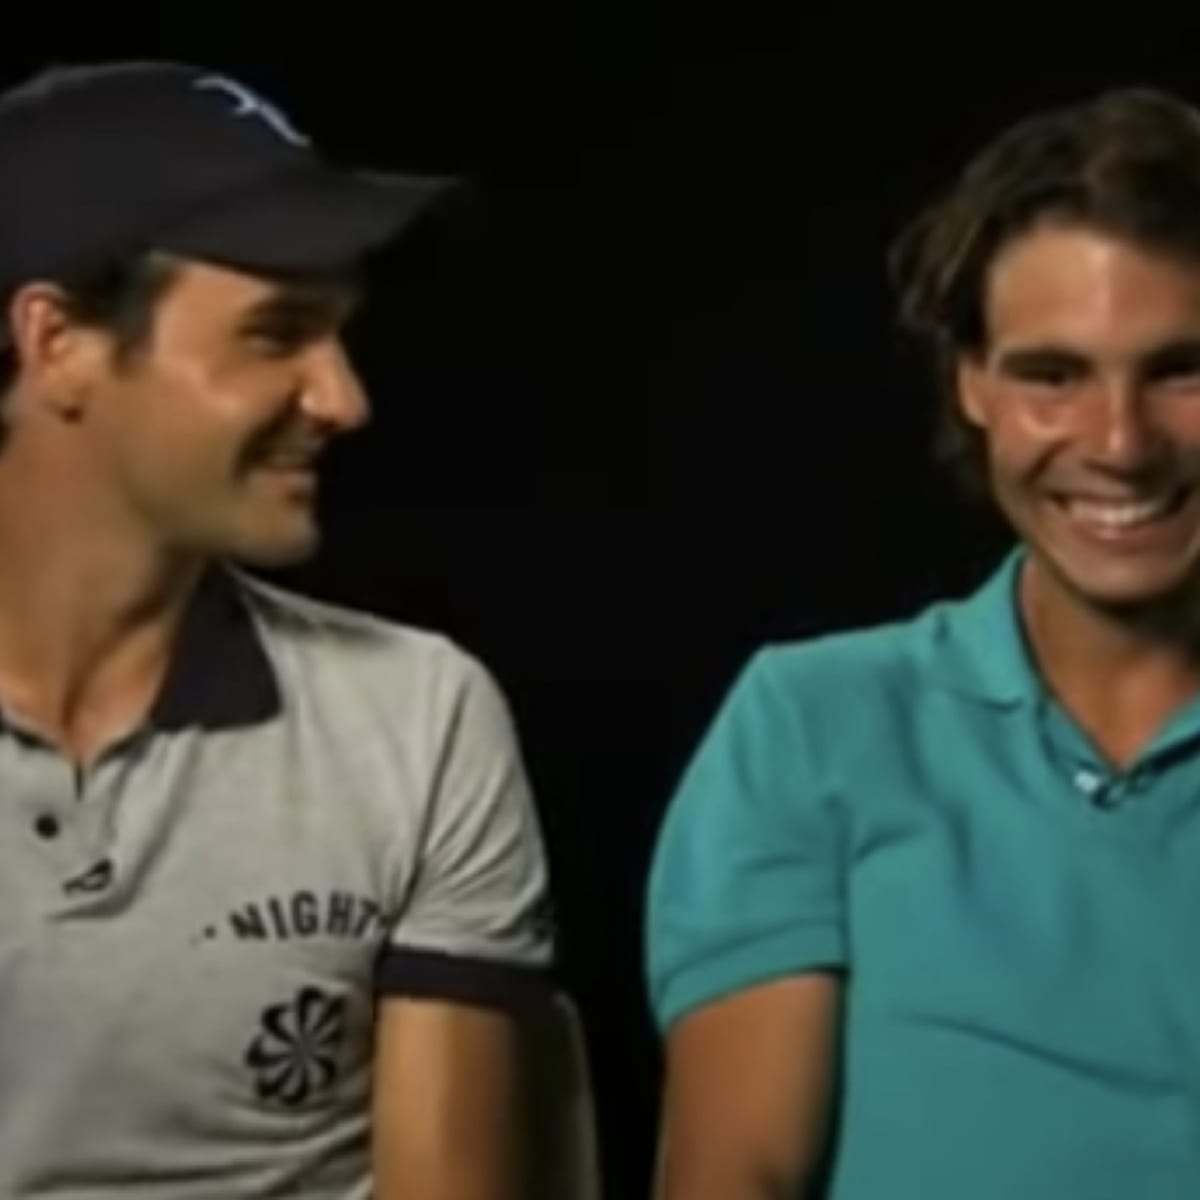 Roger Federer, Rafael Nadal TV spot: Funny classic video - SI Kids: Sports  News for Kids, Kids Games and More